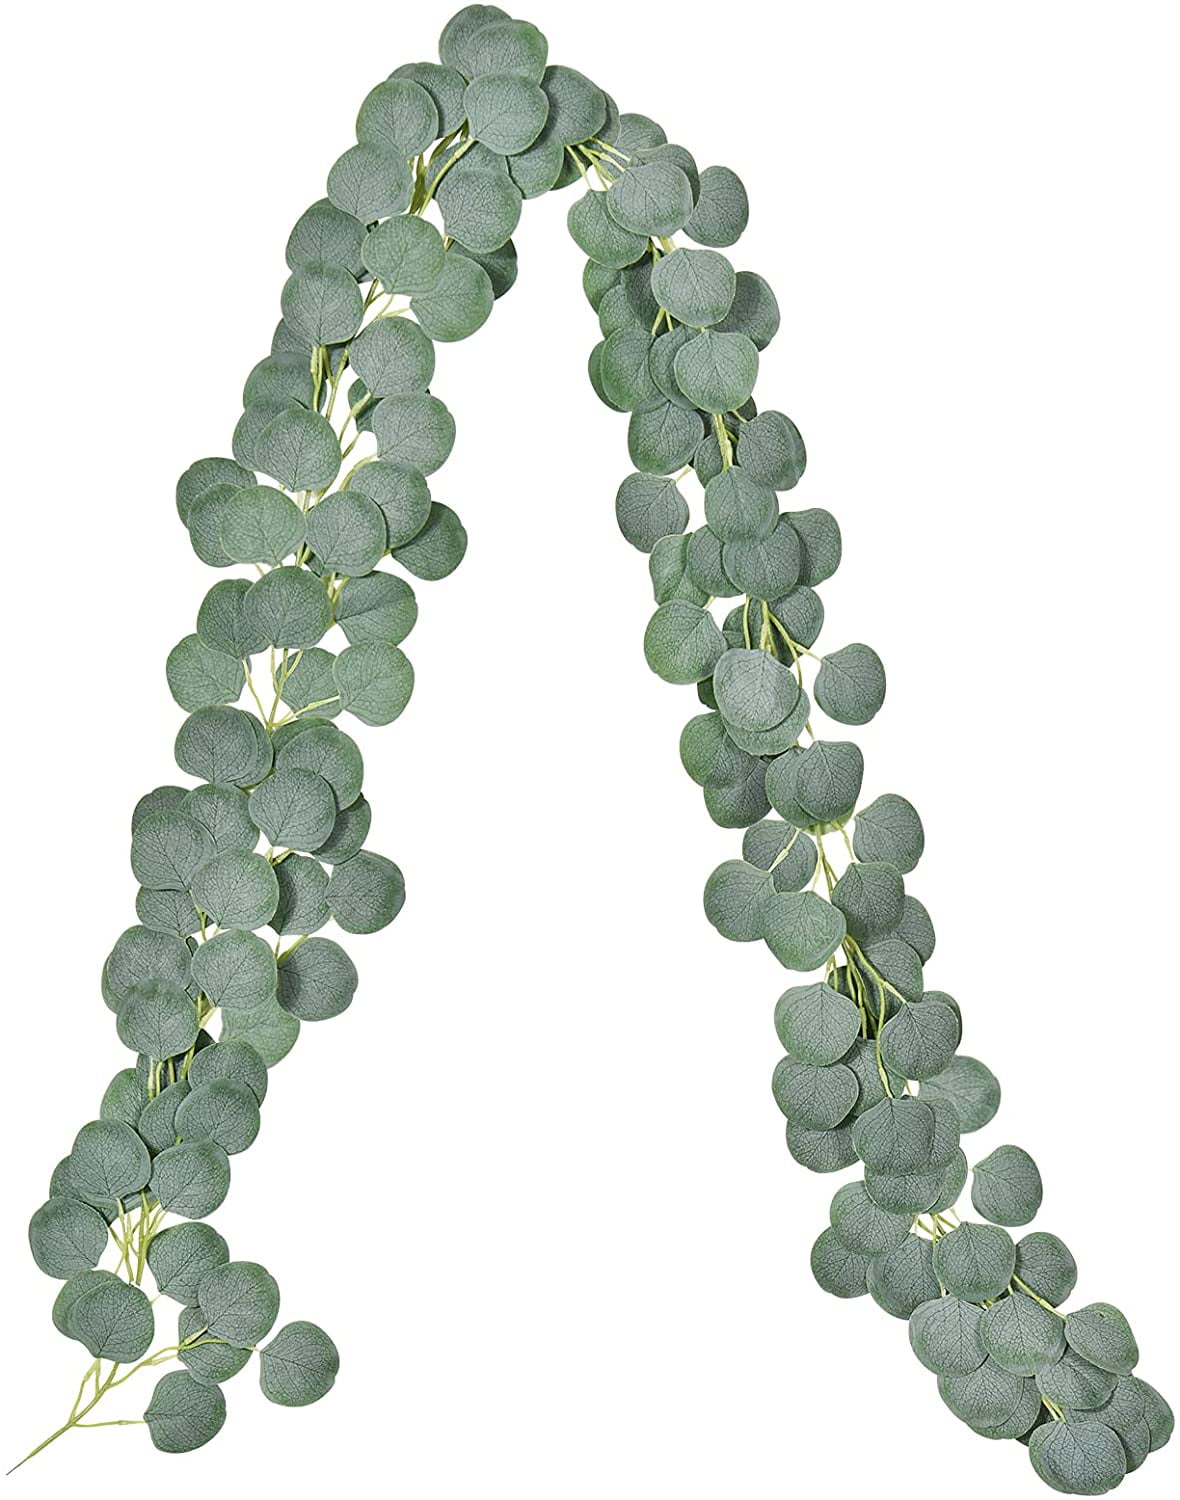 2 Strands of Faux Greenery with Silver Dollar Eucalyptus with Willow Leaves and Vines for Wedding Decorations Room Décor Greenery Garland Décor NESTURS & KALTRONS Artificial Eucalyptus Garlands